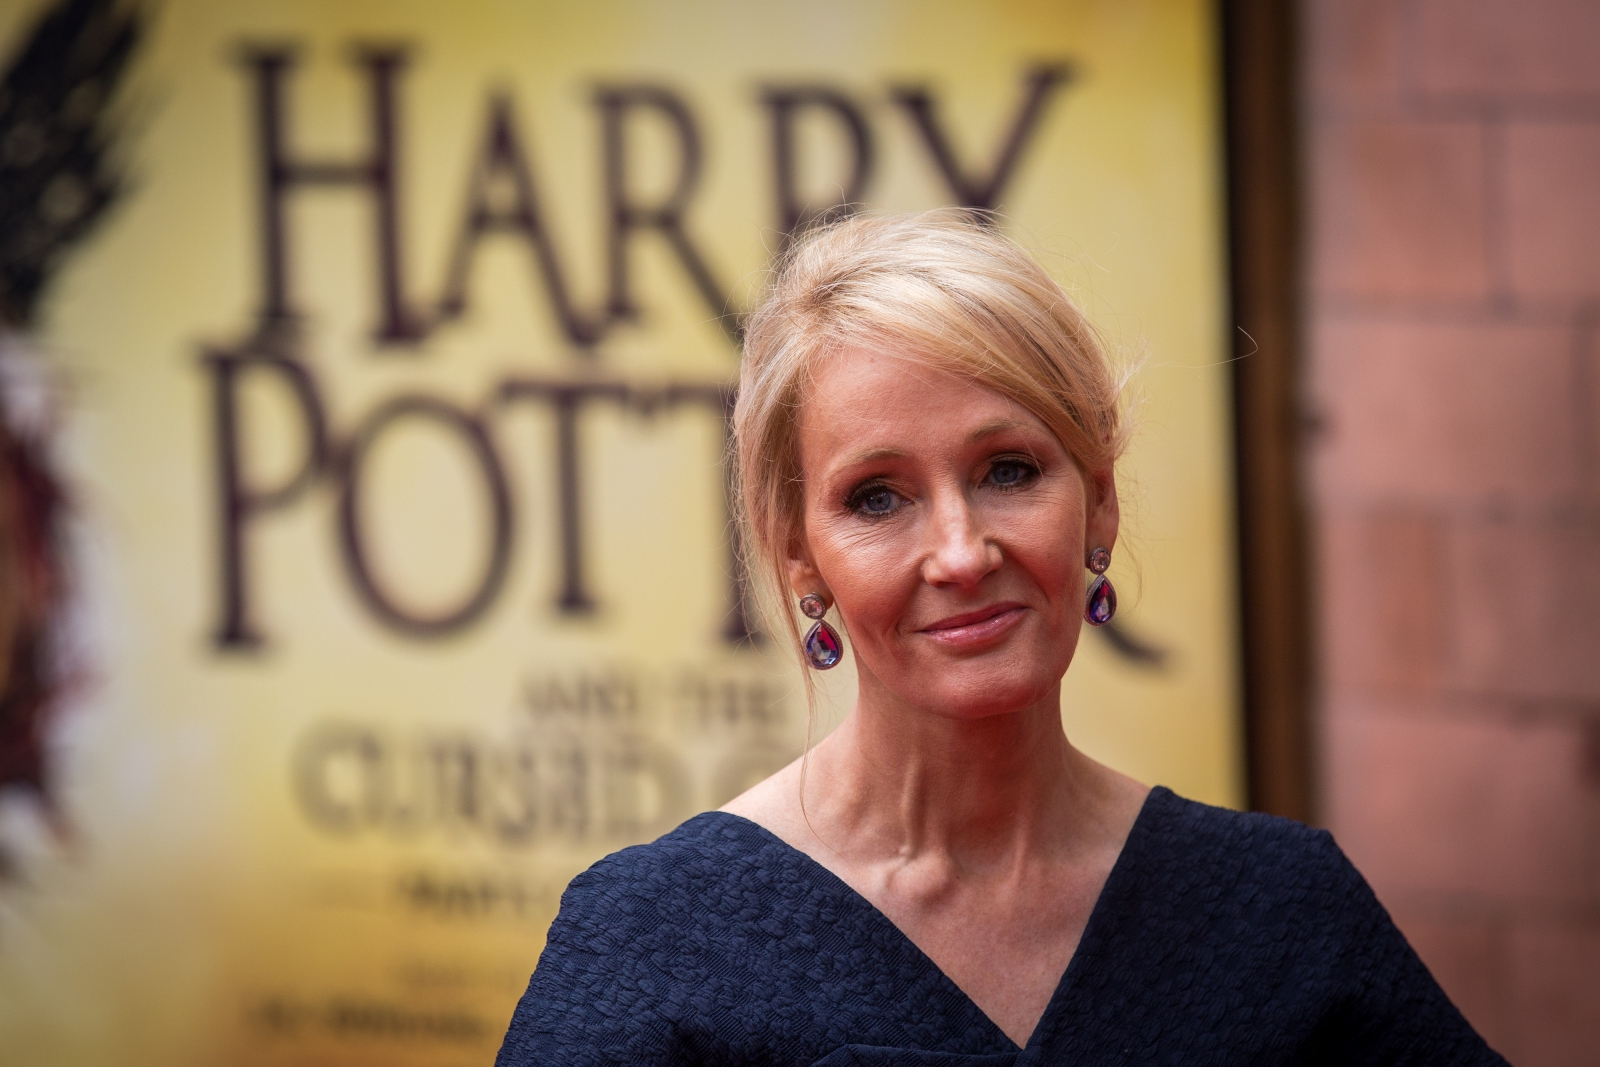 Two SNP candidates state Rowling is a ‘national treasure’ despite ‘Harry Potter’ author’s transphobic views